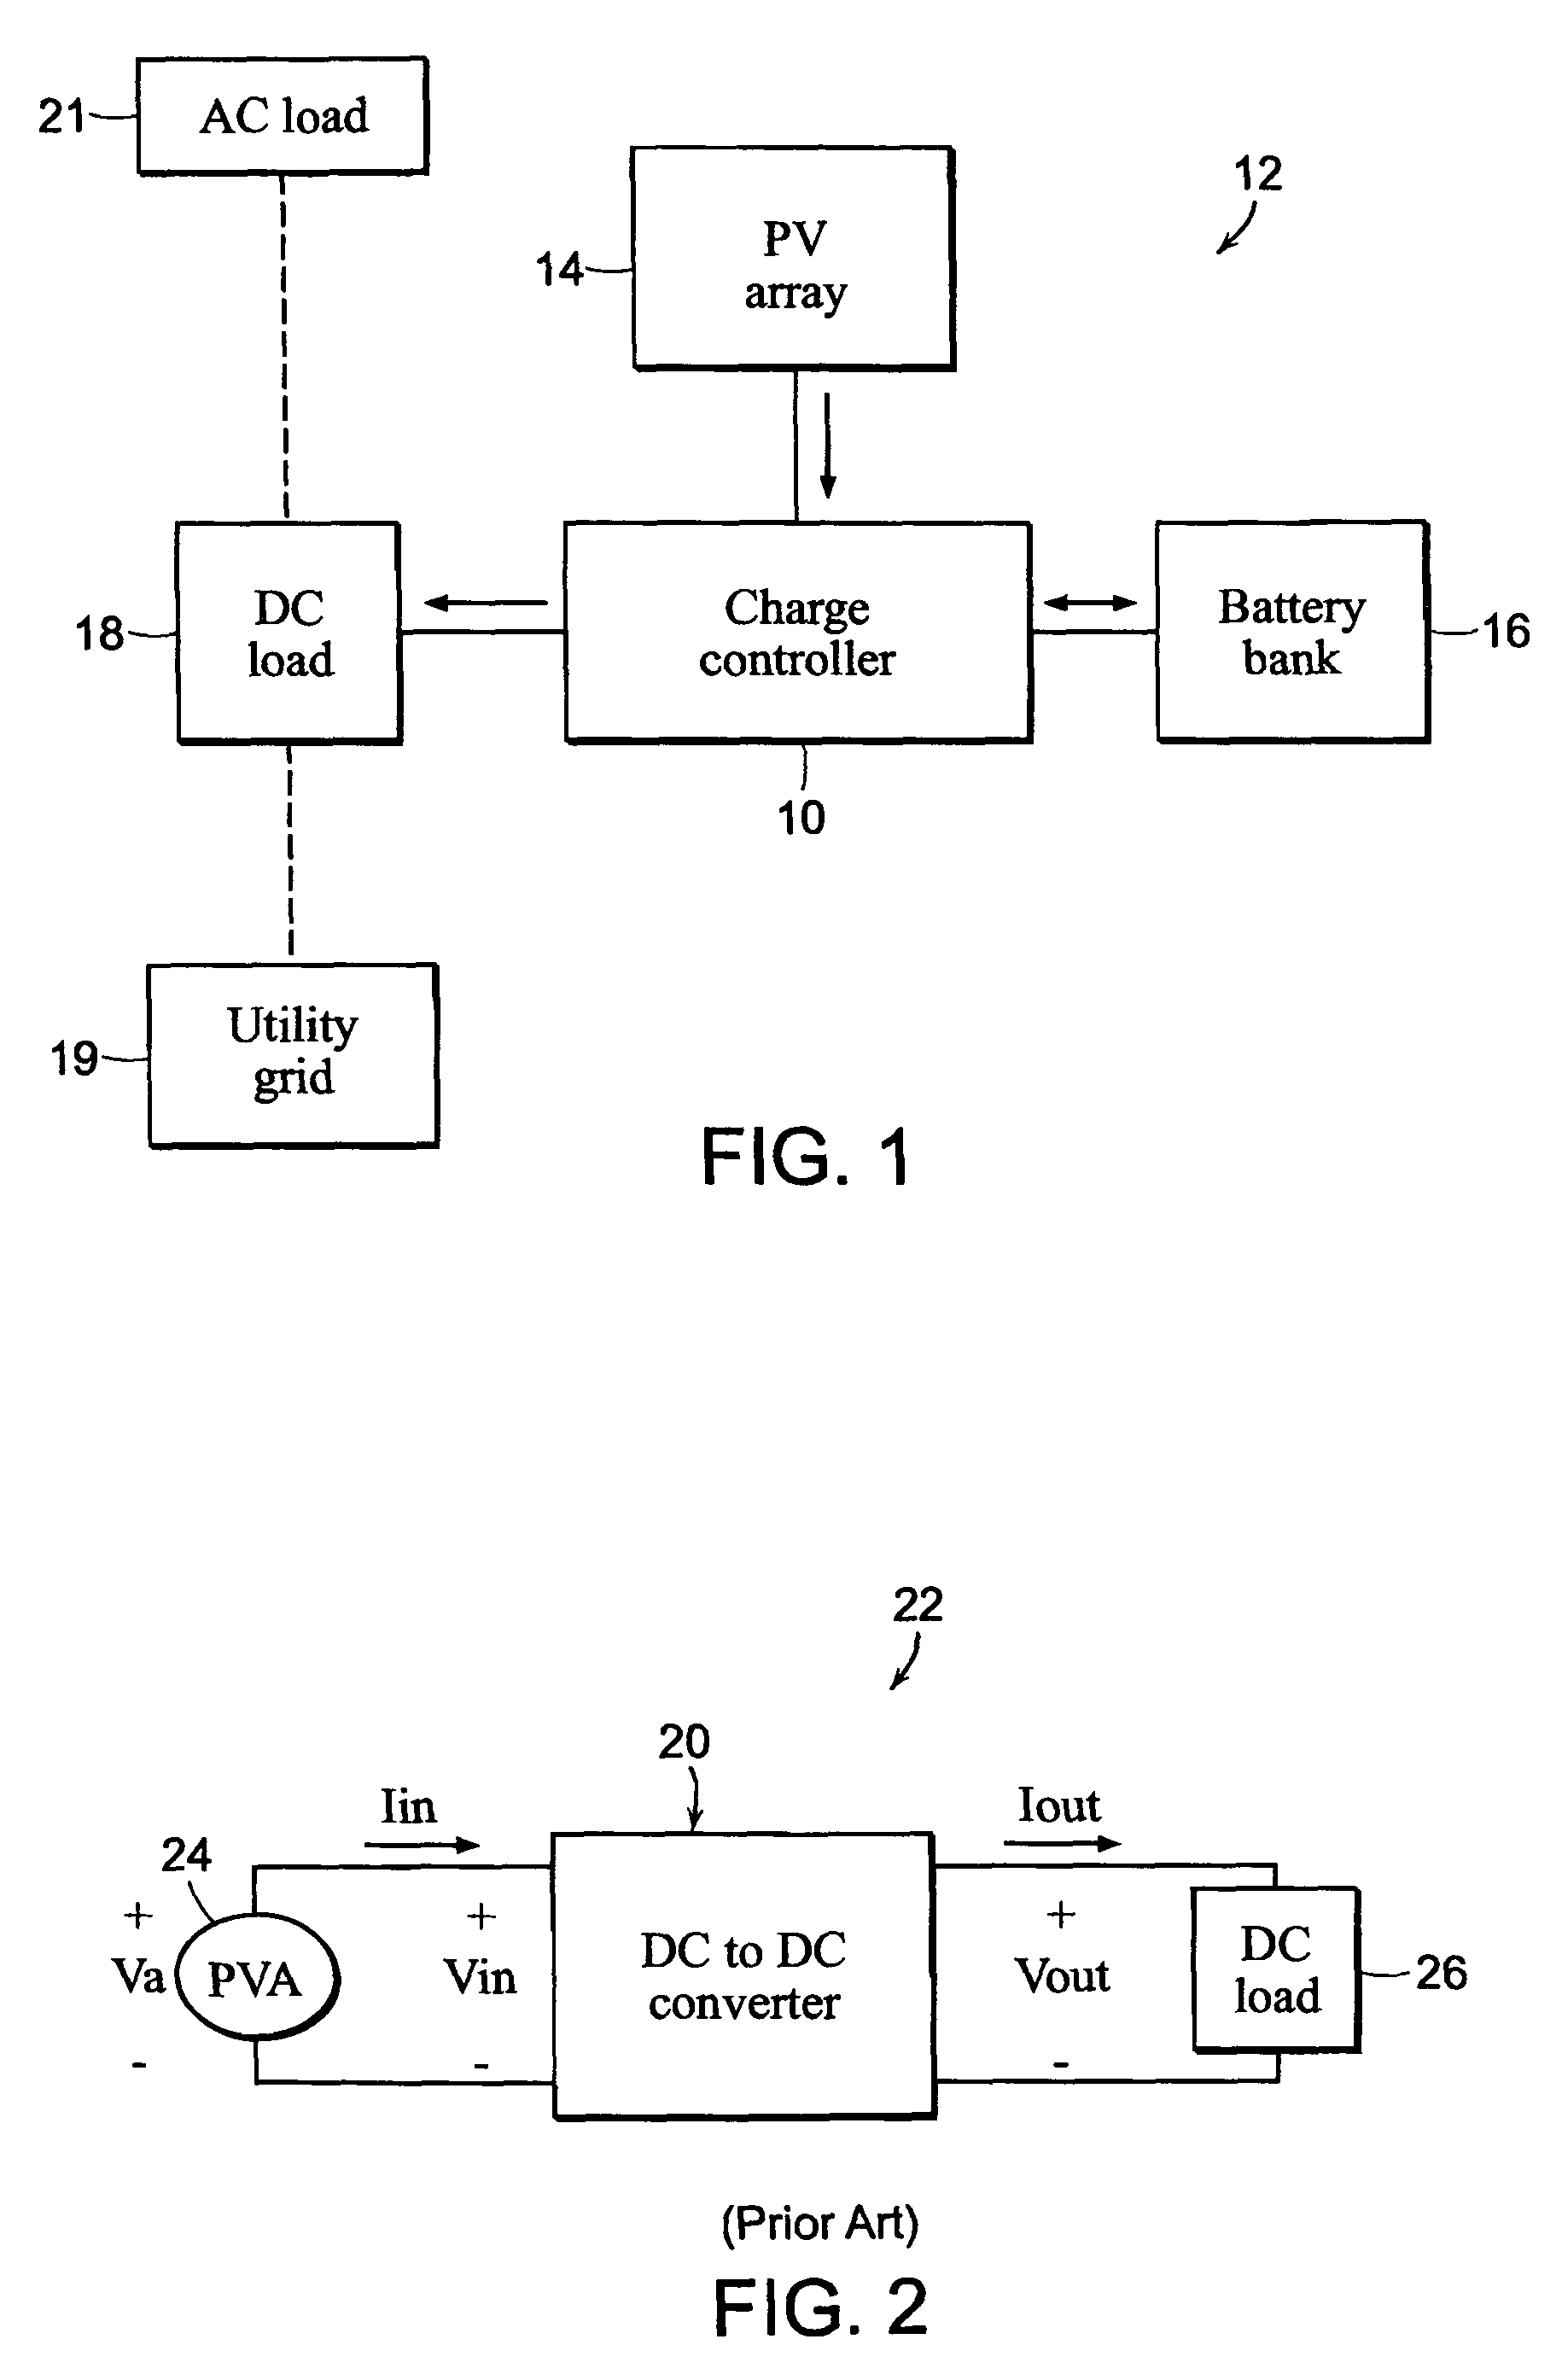 Modulation control scheme for power converters in photovoltaic system charge controllers